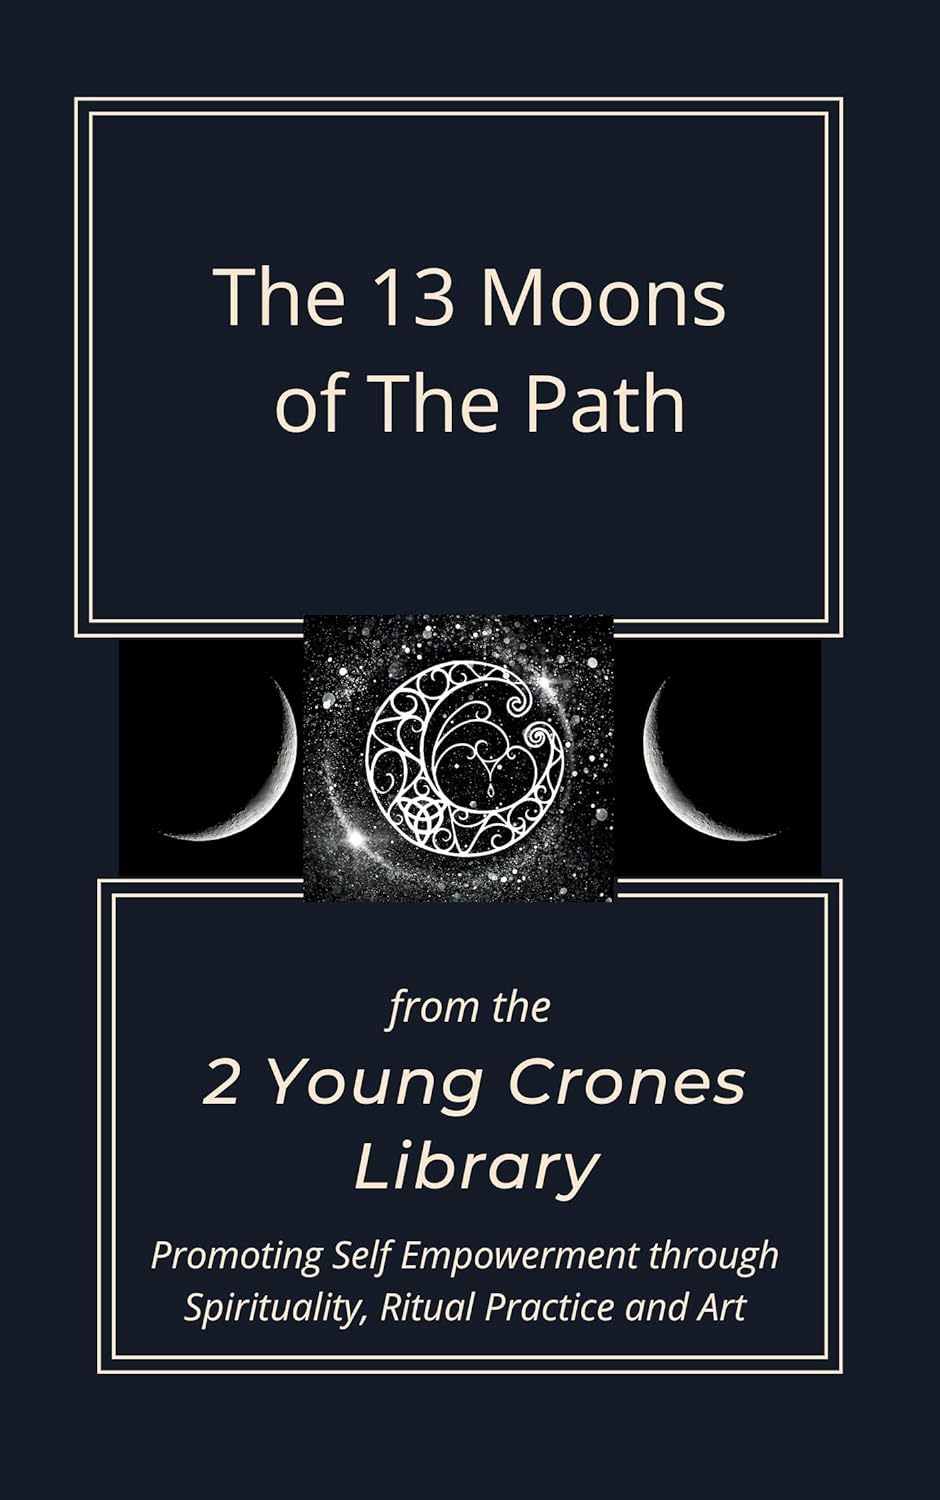 The Thirteen Moons of The Path